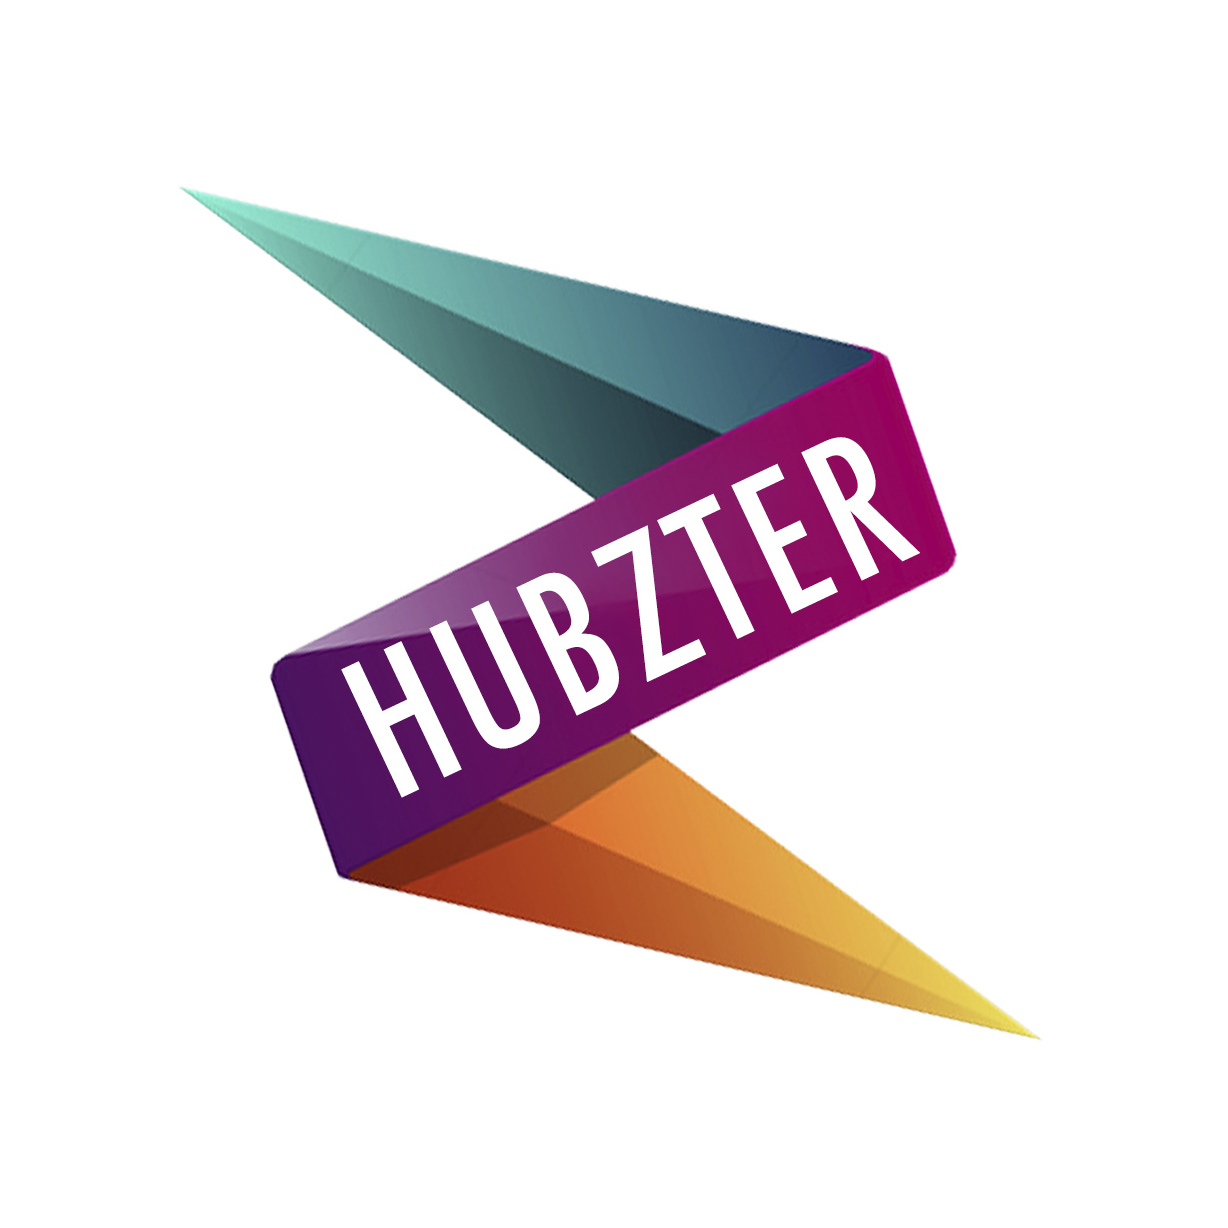 About Us - Hubzter.